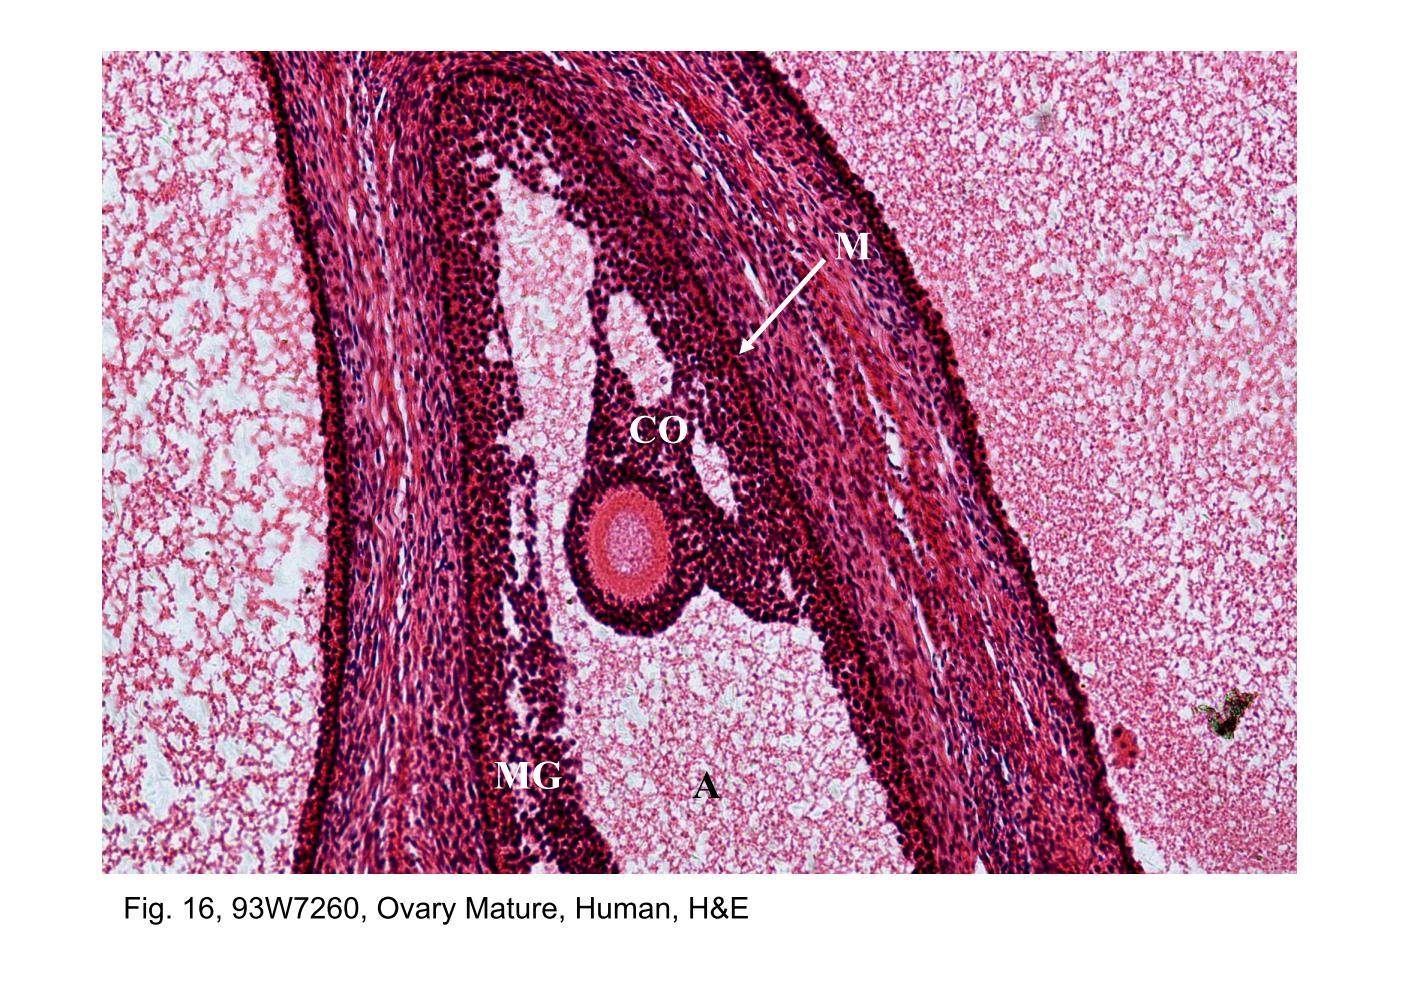 block14_31.jpg - Fig. 16, 93W7260, Ovary Mature, Human, H&EA stage in the growth of the mature (Graafian) follicle (M) is shown  here. The antrum (A) is larger, and the oocyte is off to one side,  surrounded by a mound of follicular cells called the cumulus  oophorus (CO). The remaining follicular cells that surround the  antral cavity are referred to as the membrana granulosa (MG).The atretic follicles (AF) are shown in figure 15. They can be  identified by virtue of the retained zona pellucida (ZP).